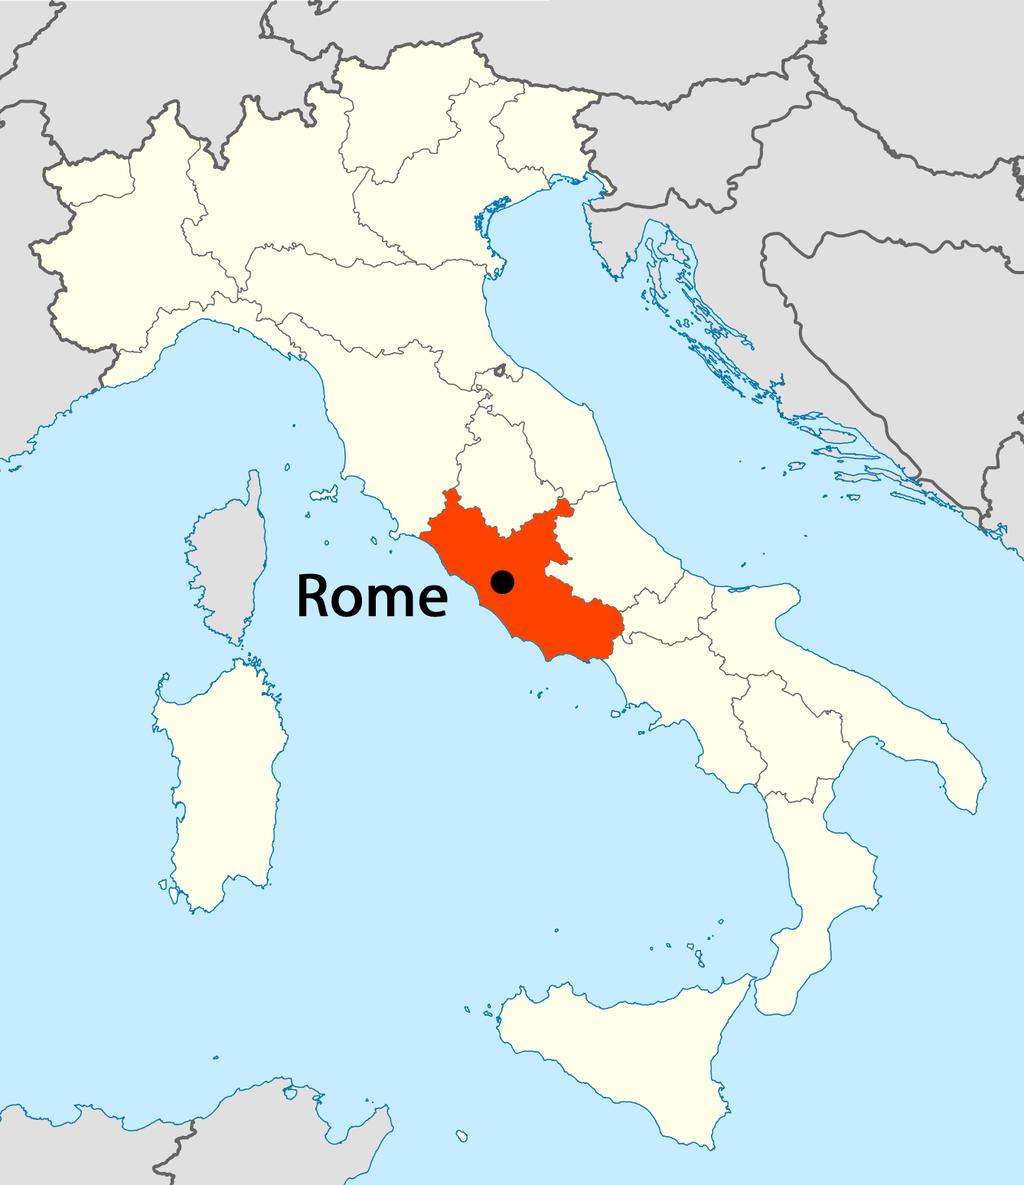 The land and peoples of Italy Because the Italian peninsula juts out into the Mediterranean, it naturally was a stopping